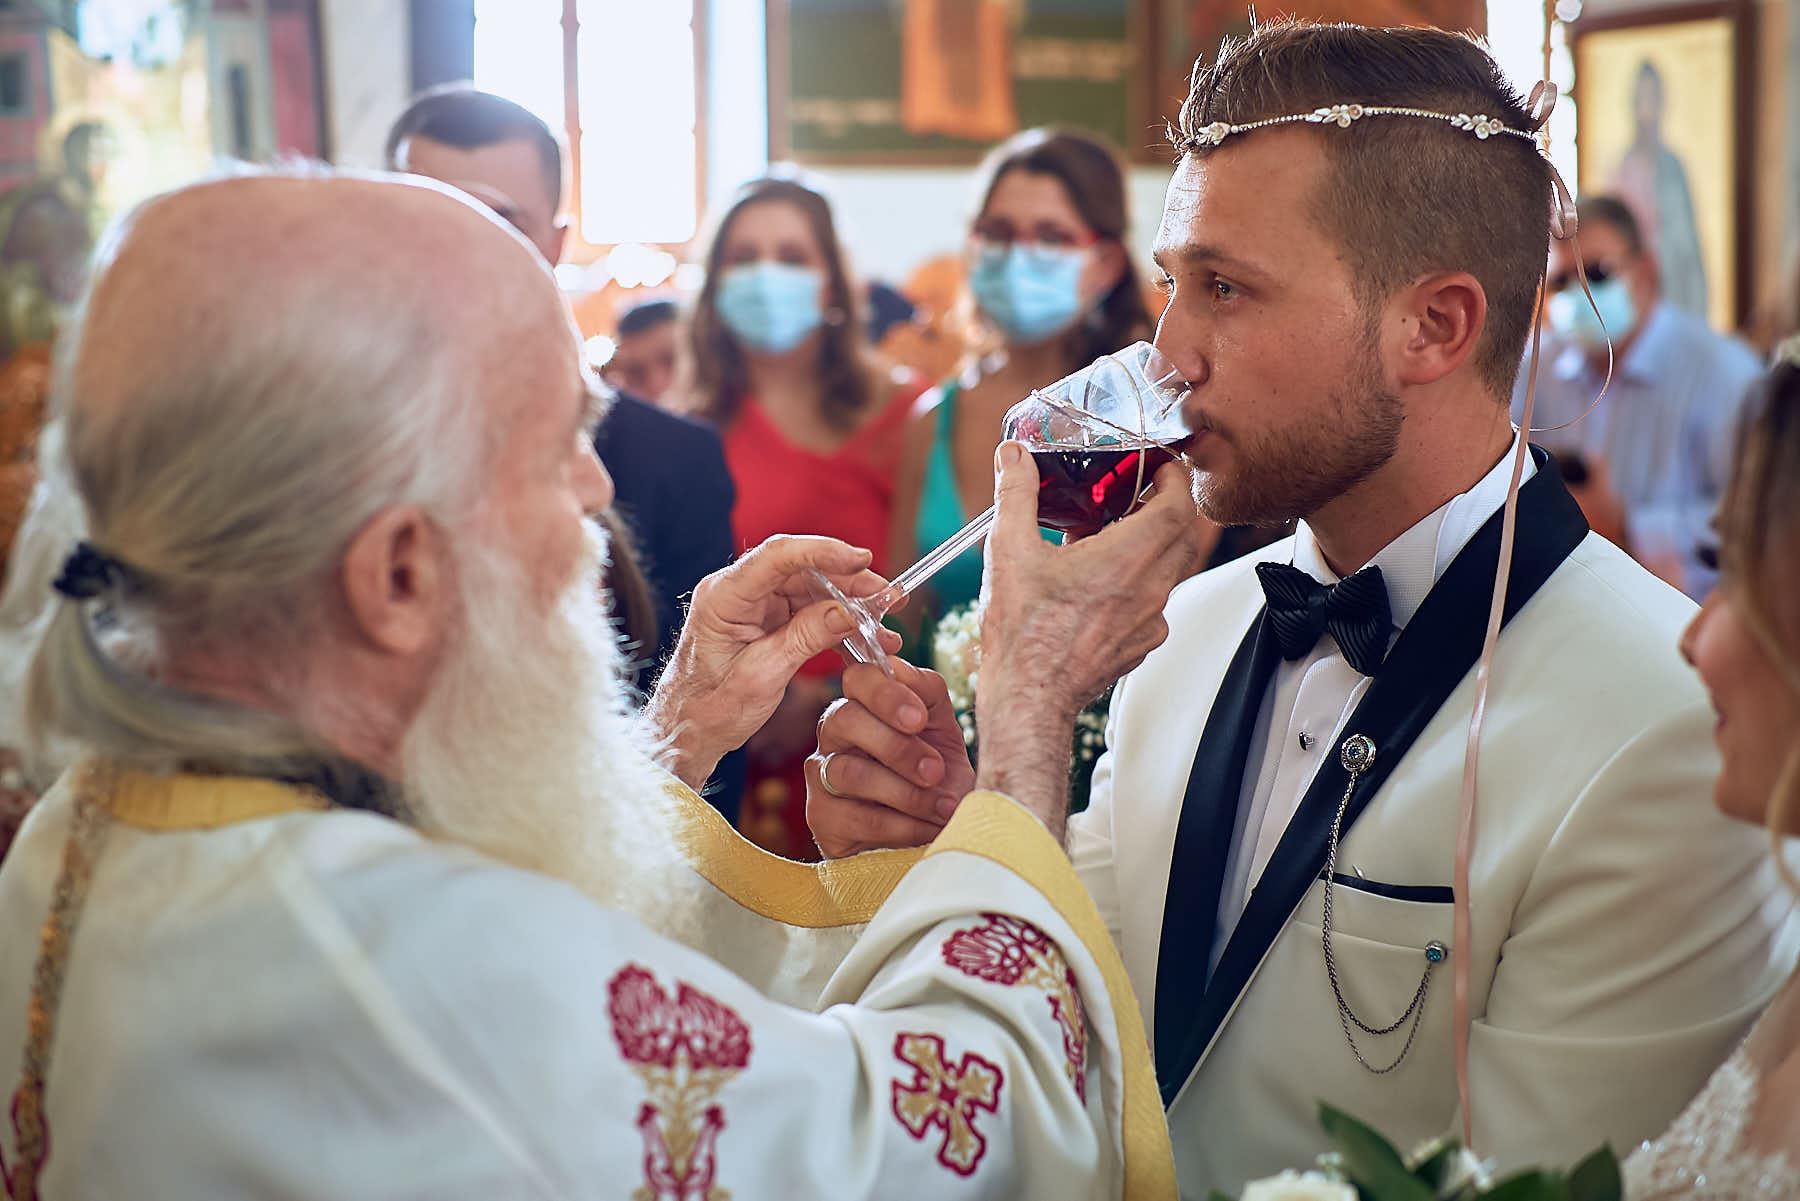 Groom drinking wine given by the priest